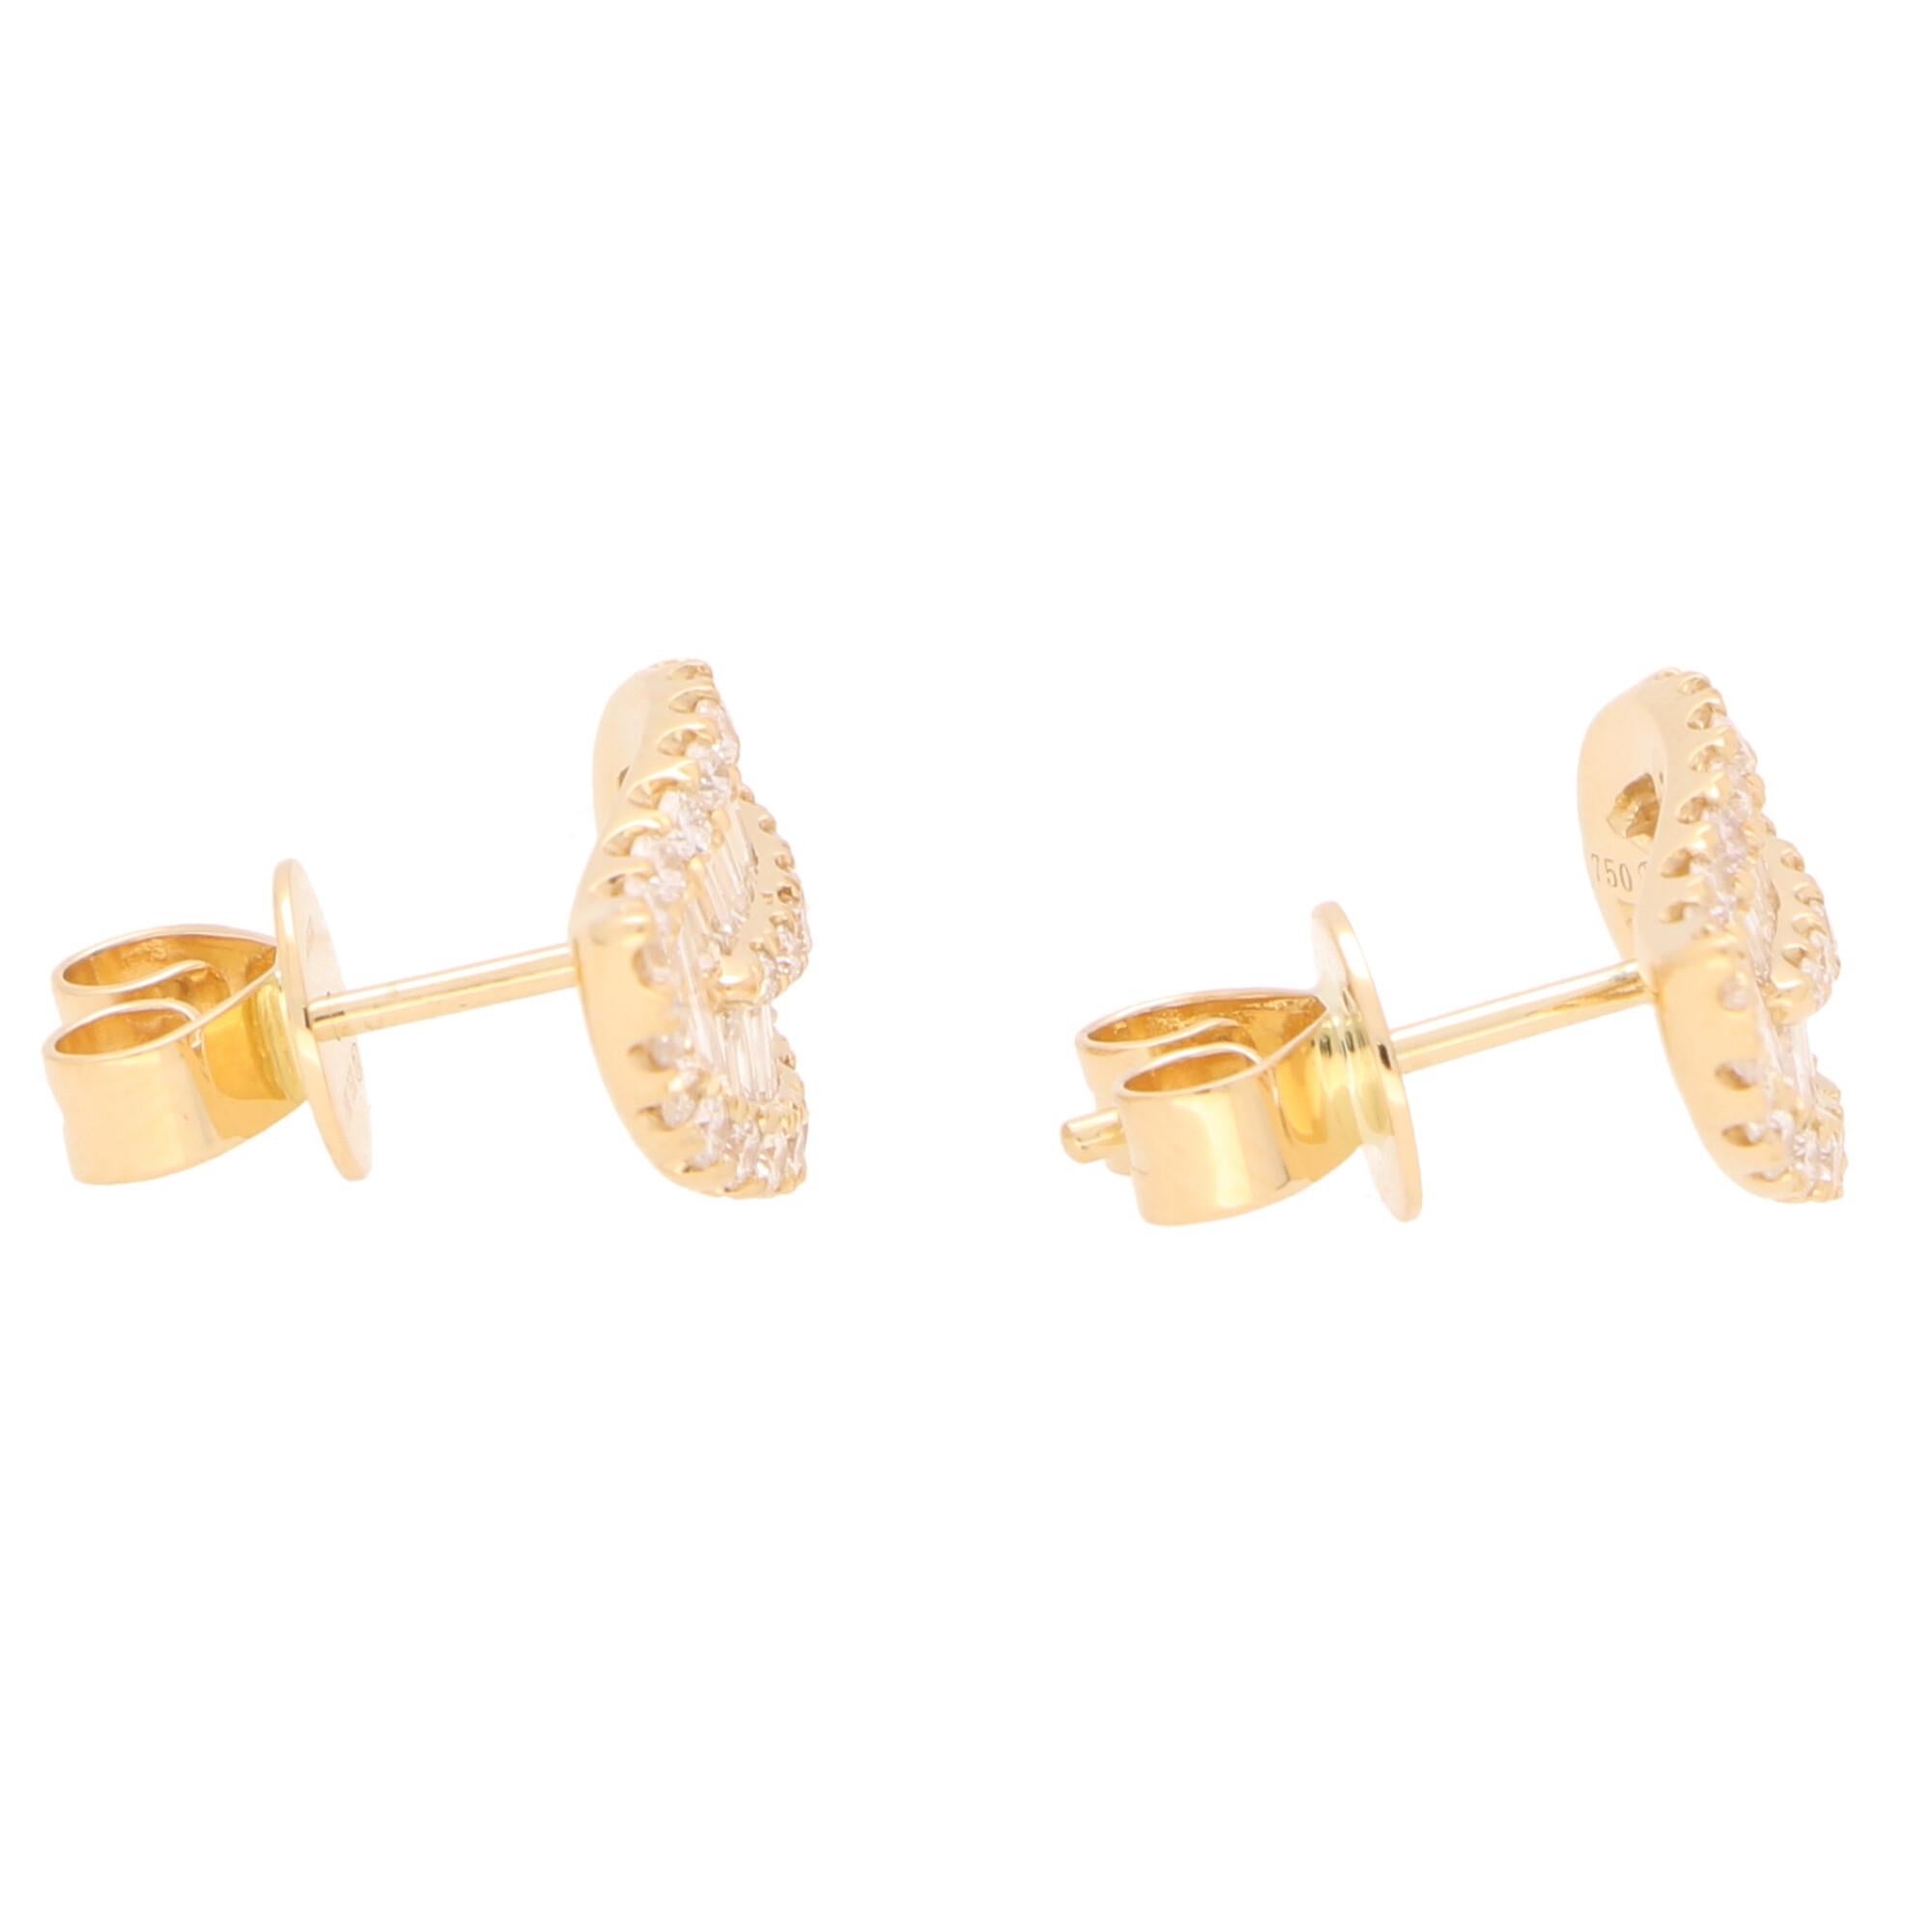 A beautiful pair of diamond leaf earrings set in 18k yellow gold. 

Each earring depicts a simple leaf design and is set with a mixture of round brilliant cut and baguette cut diamonds. The contrast between the two cuts of diamond is superb and